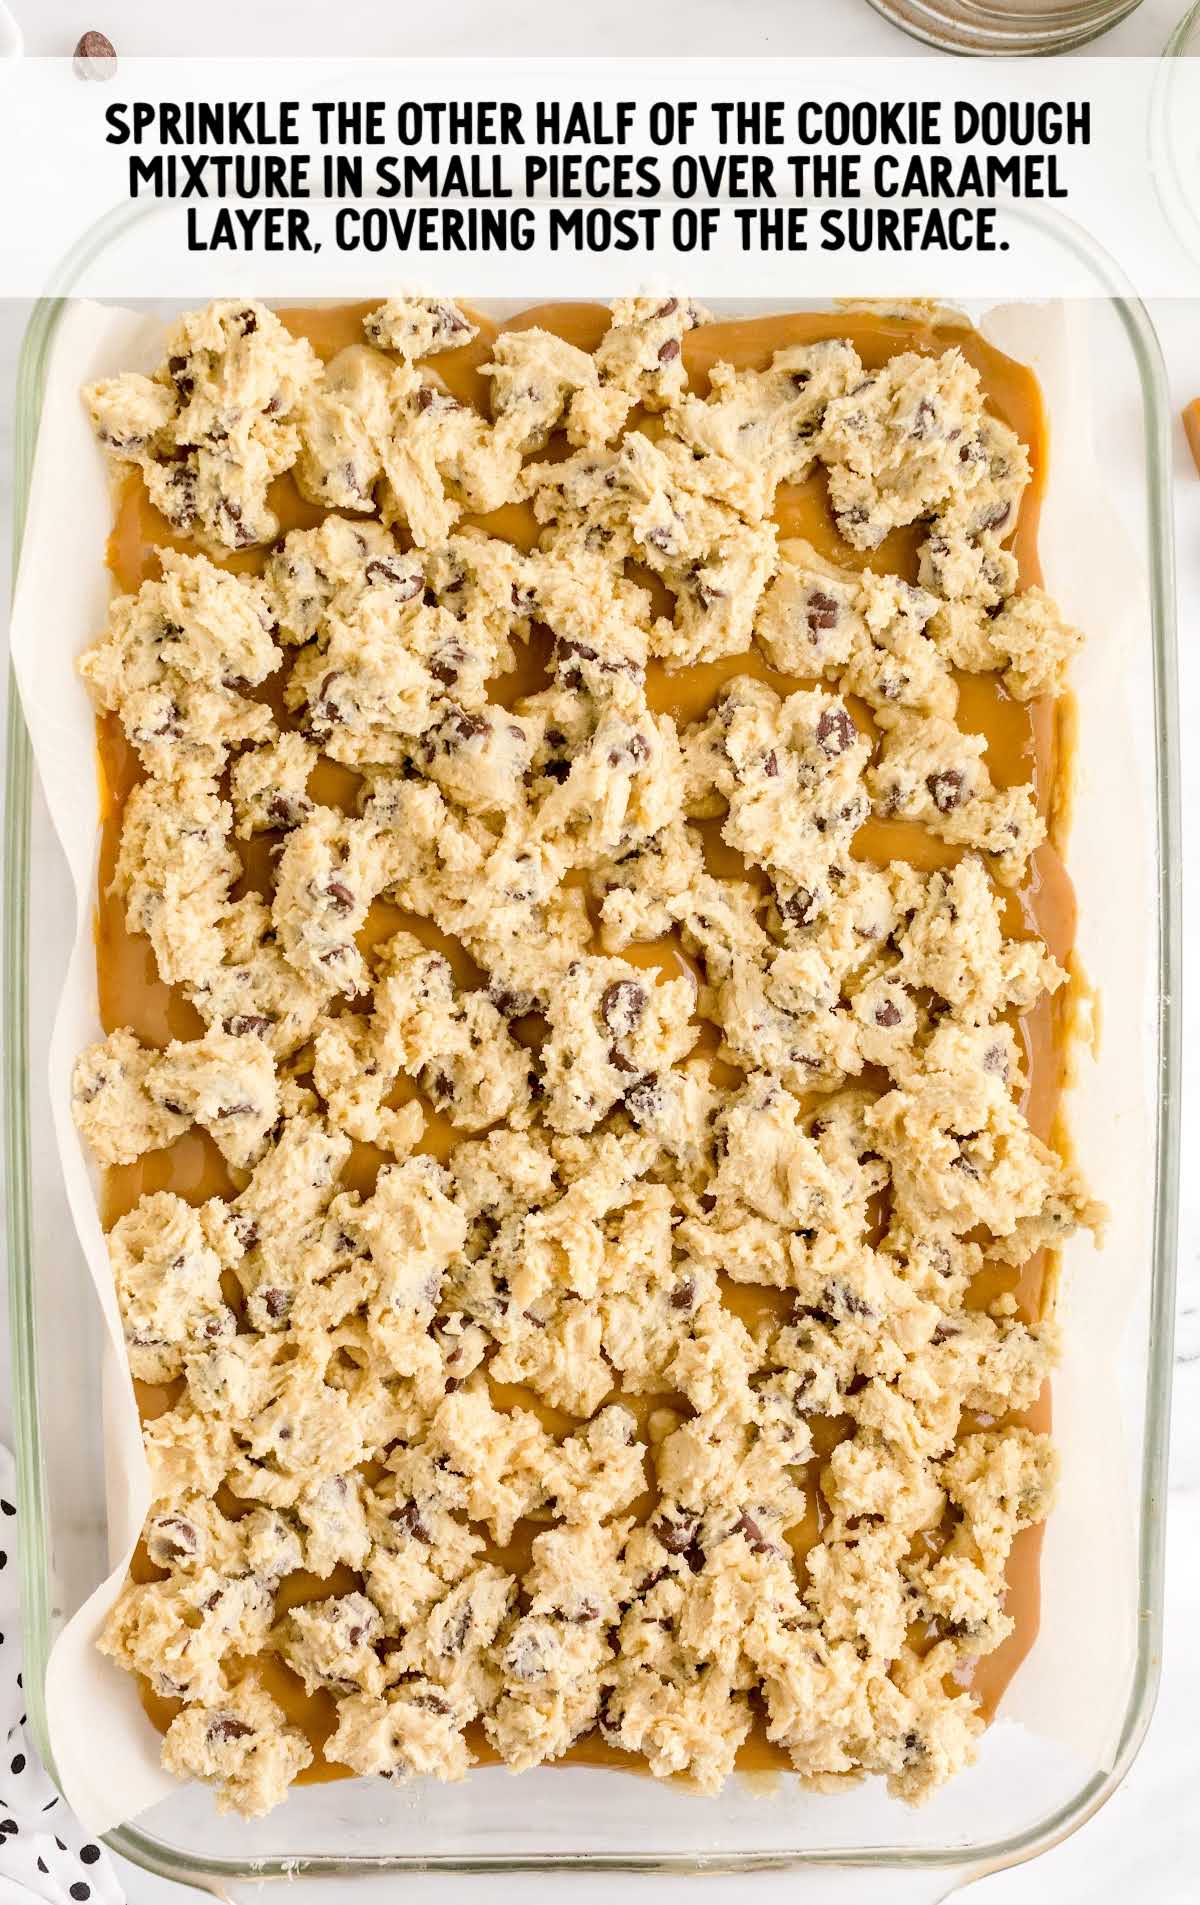 cookie dough being sprinkled on top of the caramel layer